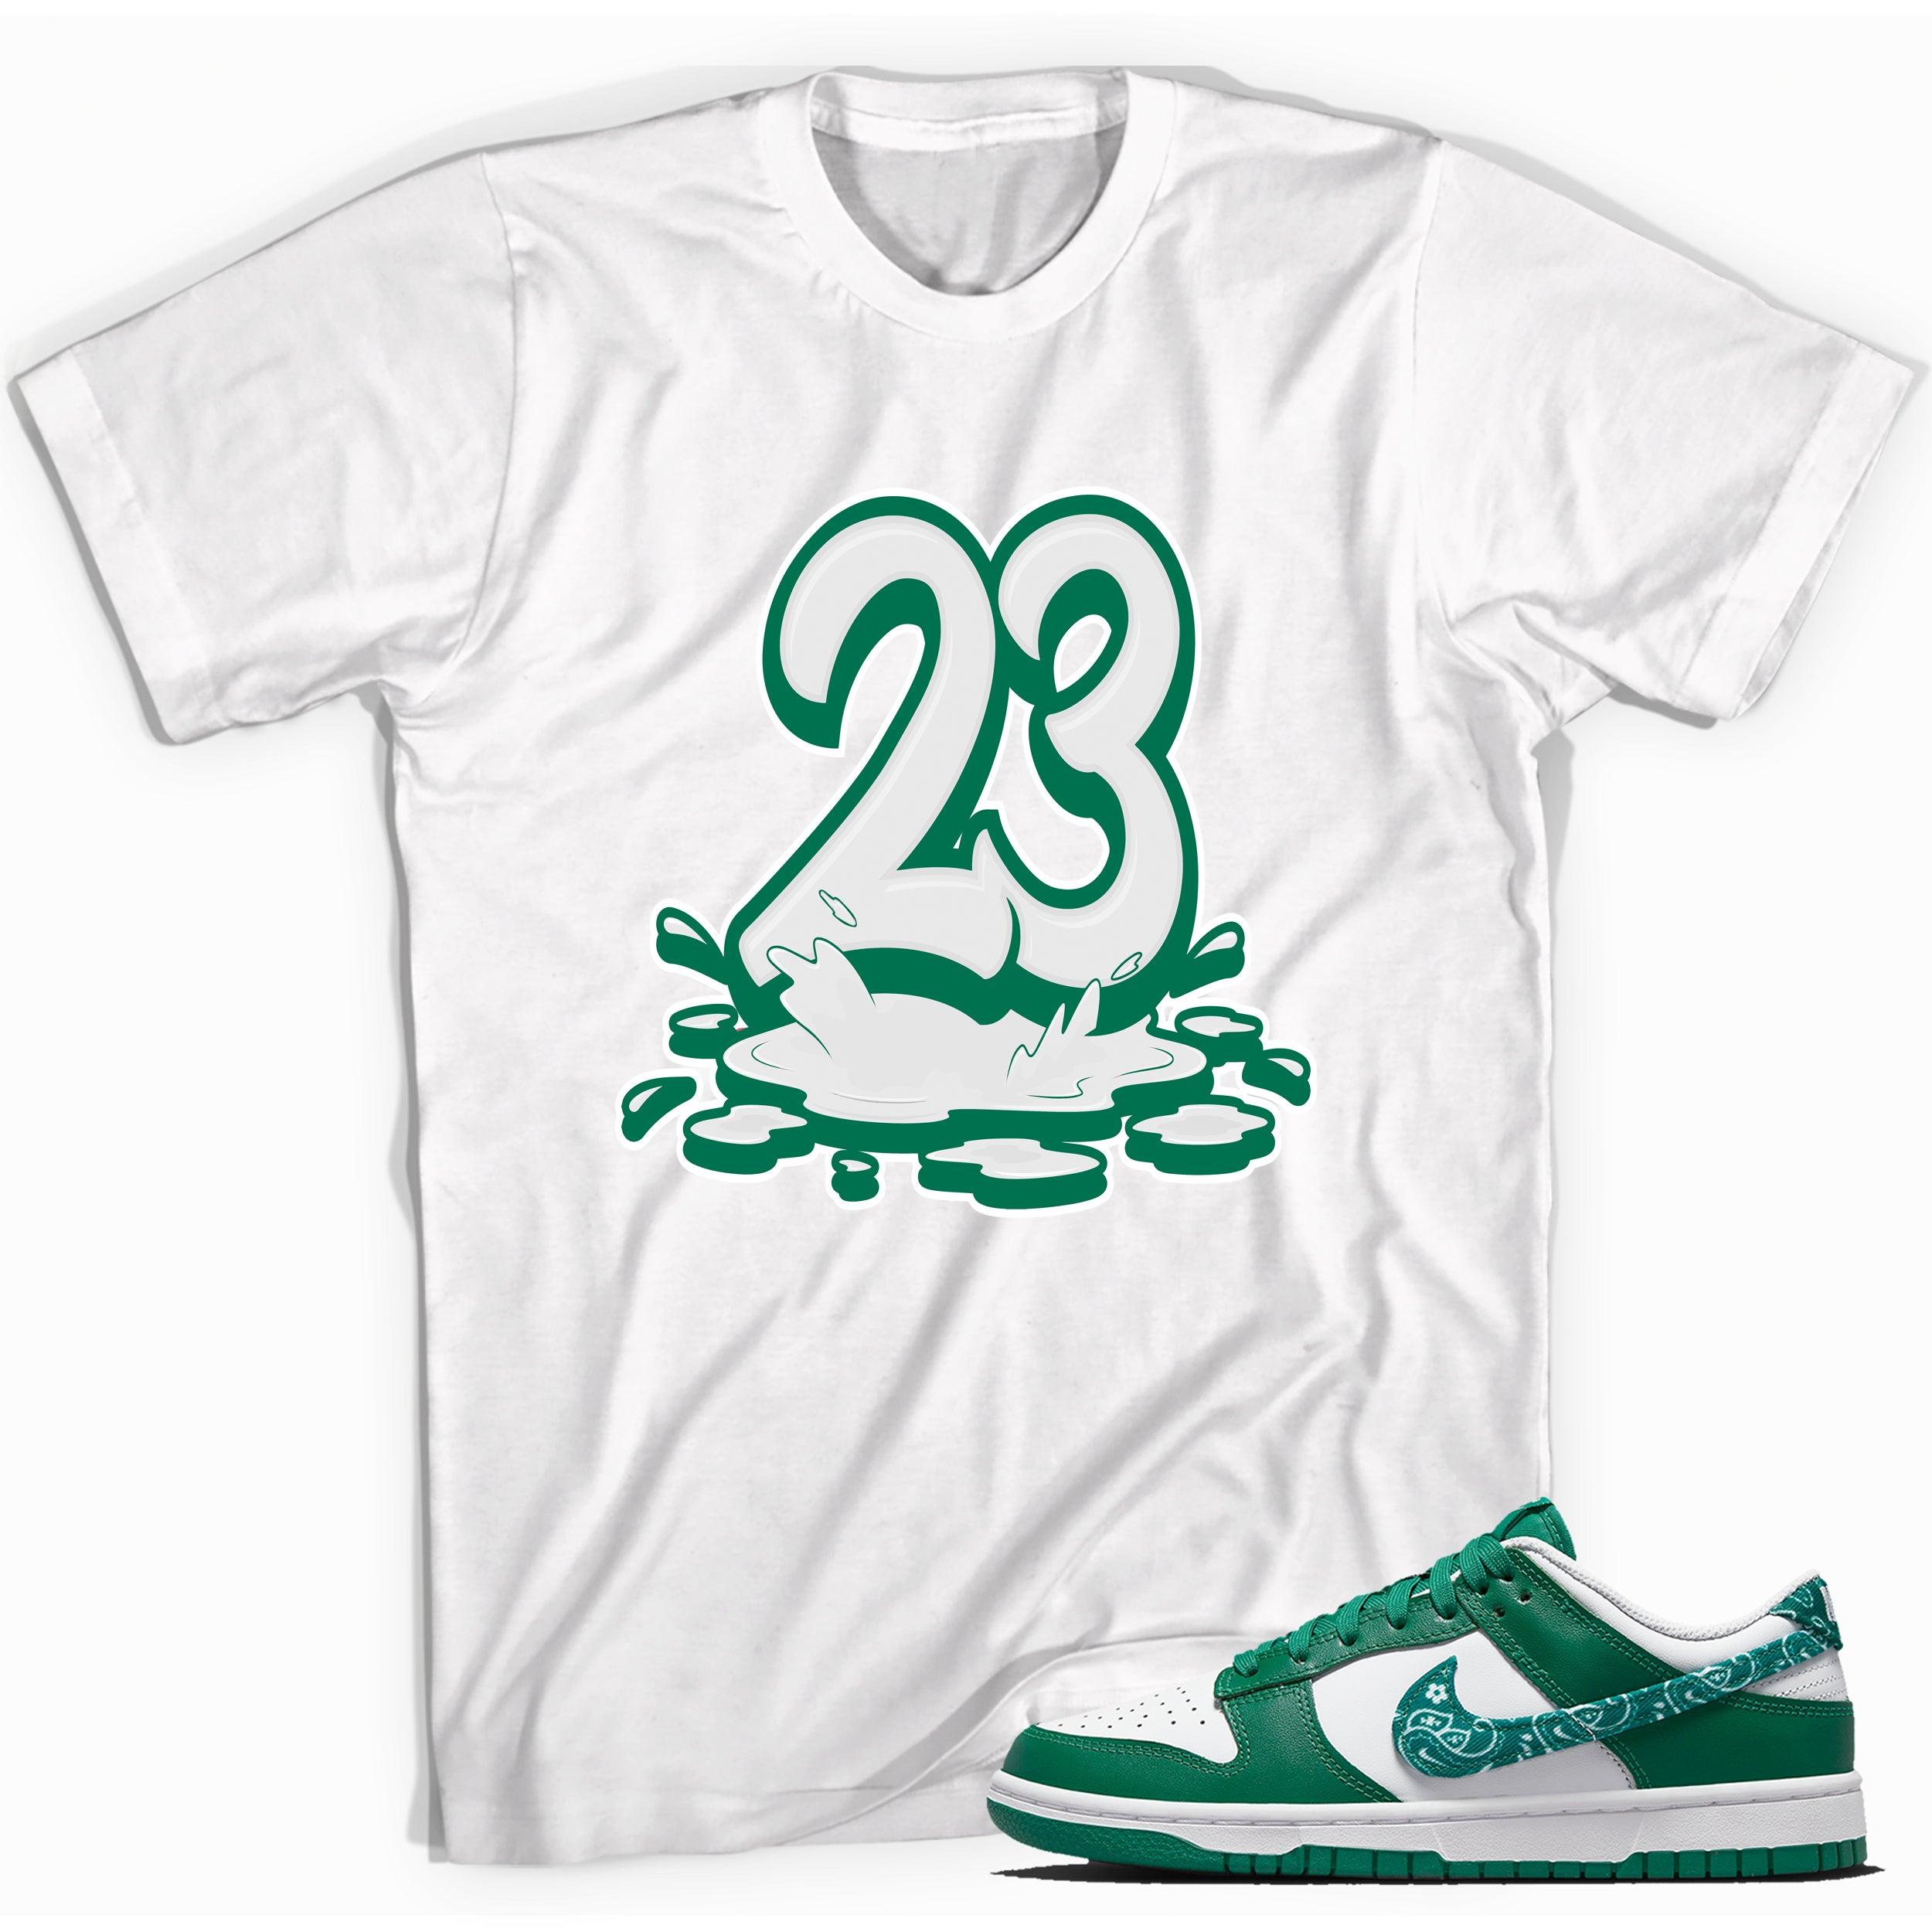 Number 23 Melting Shirt Nike Dunk Low Essential Paisley Pack Green photo